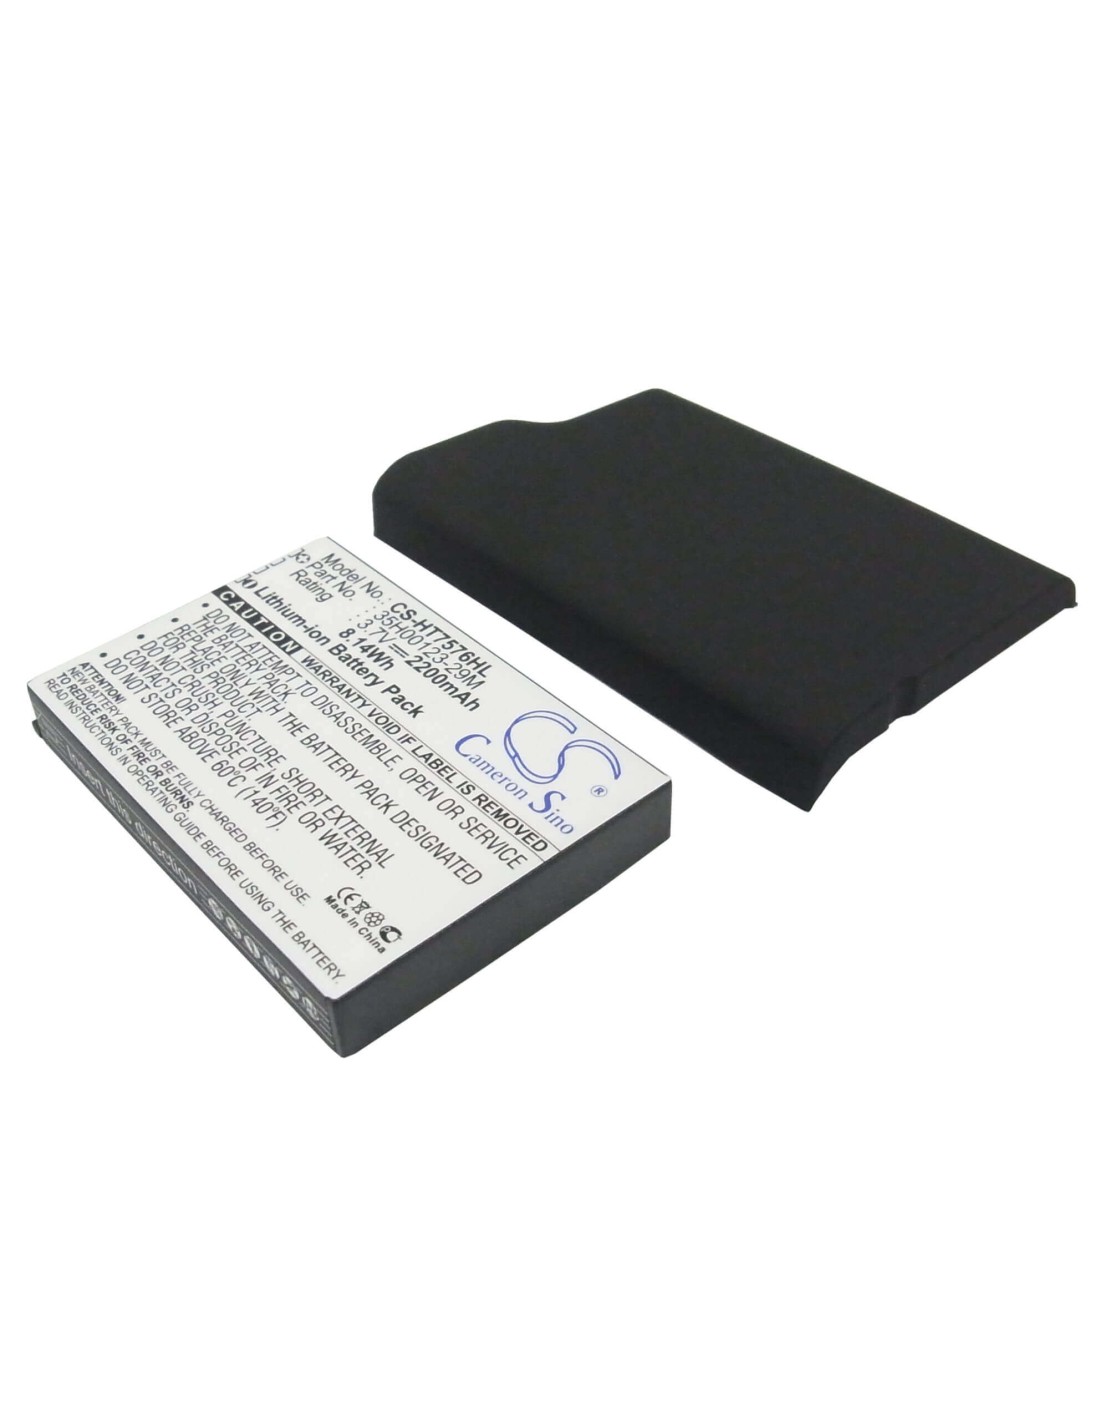 Battery for HTC 7 Pro, T7576 3.7V, 2200mAh - 8.14Wh